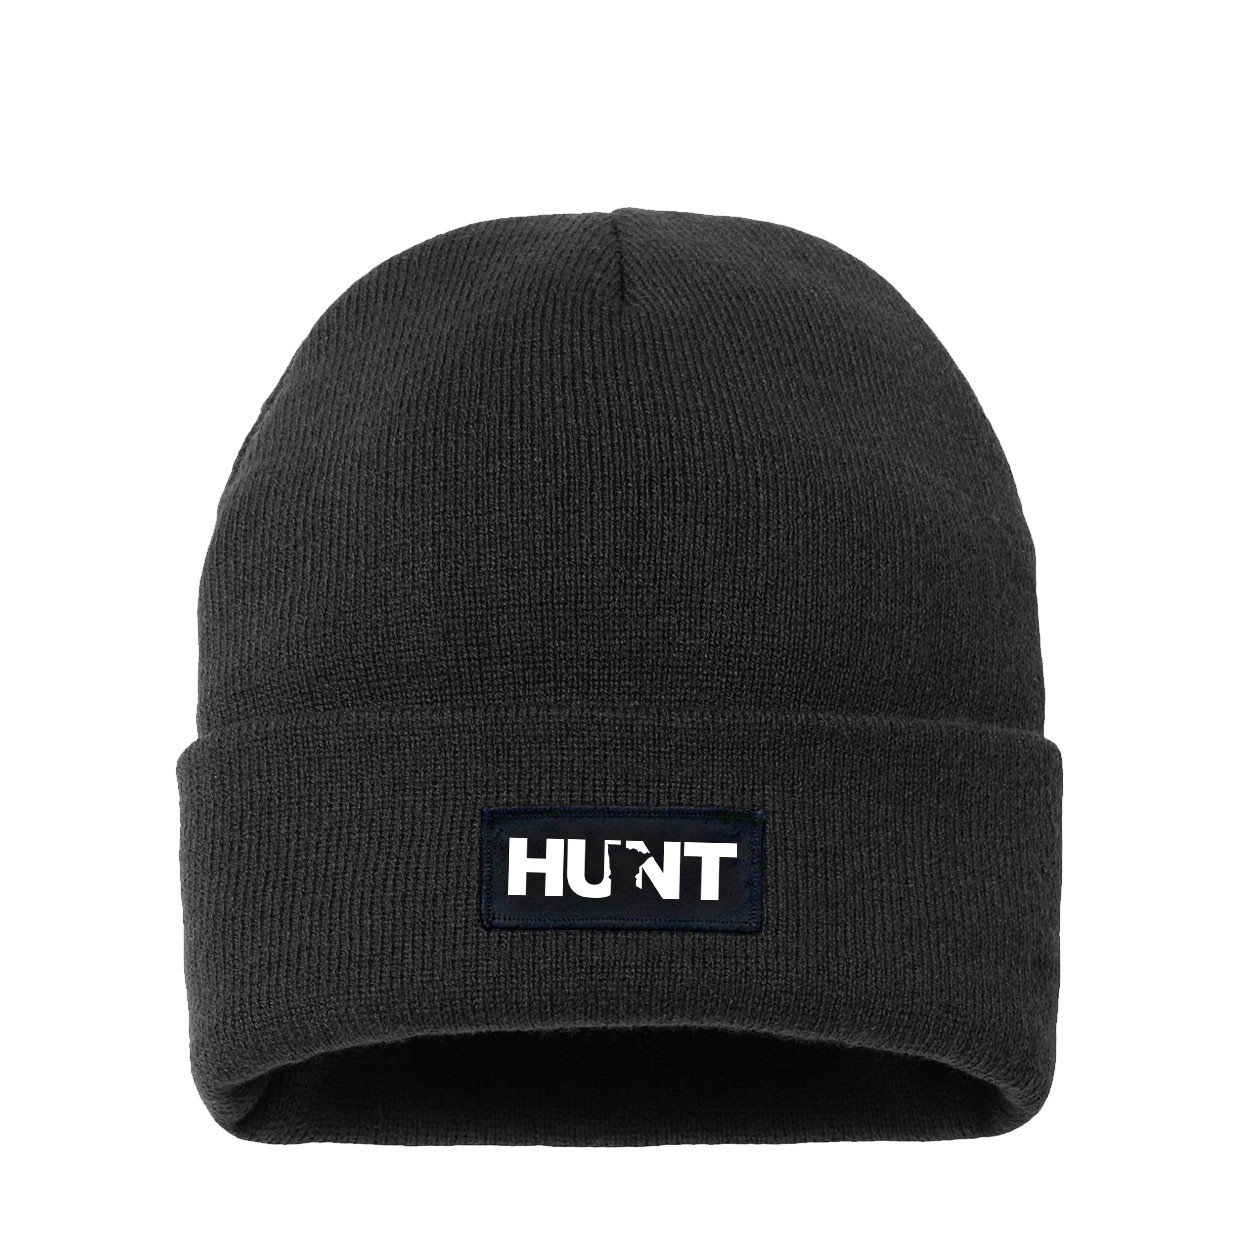 Hunt Minnesota Night Out Woven Patch Night Out Sherpa Lined Cuffed Beanie Black (White Logo)